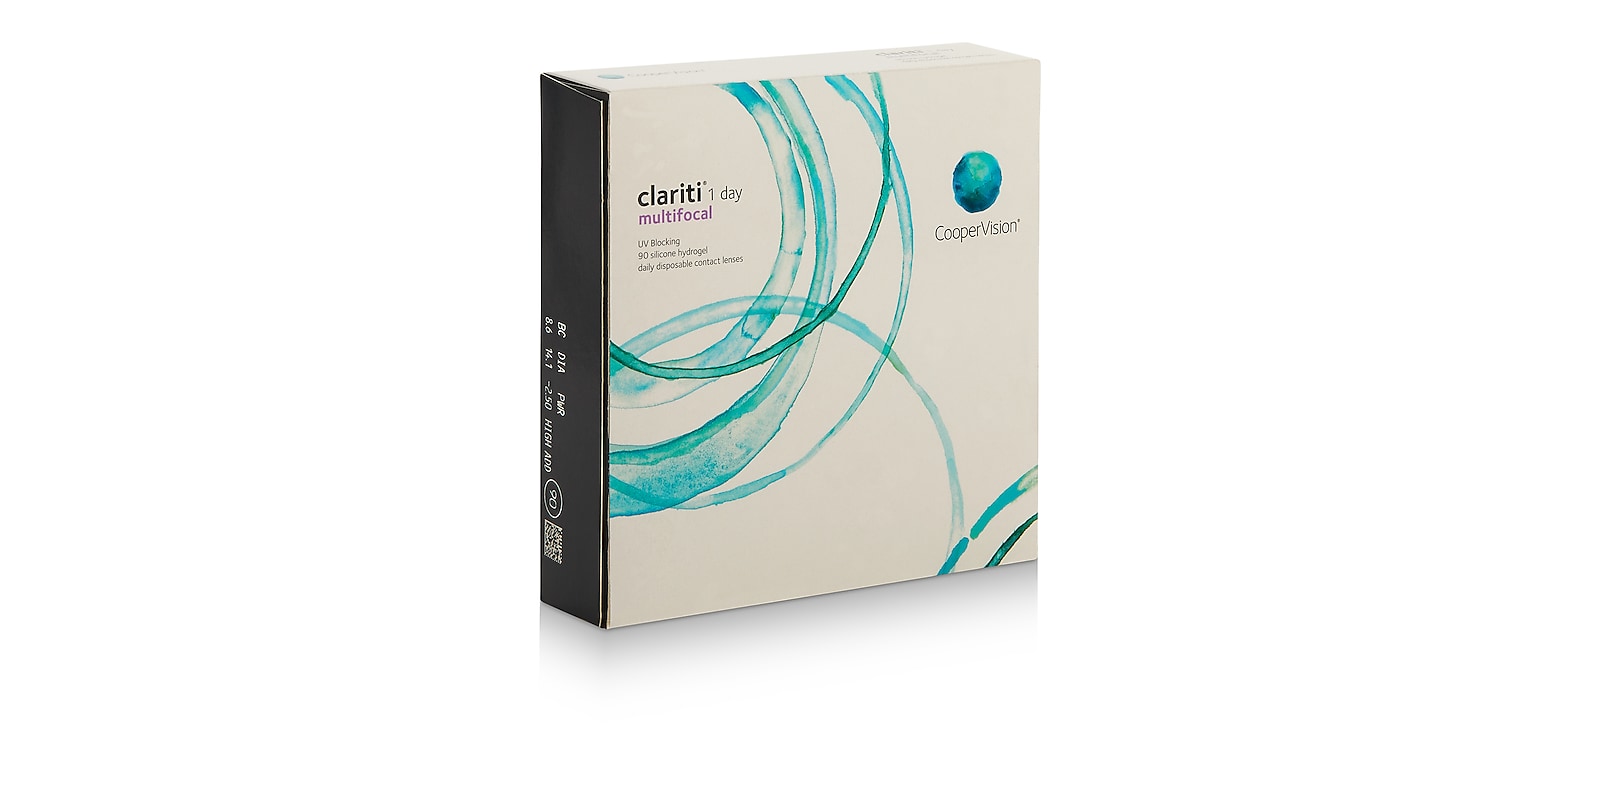 COOPERVISION - Clariti 1-day Multifocal 90 Pack